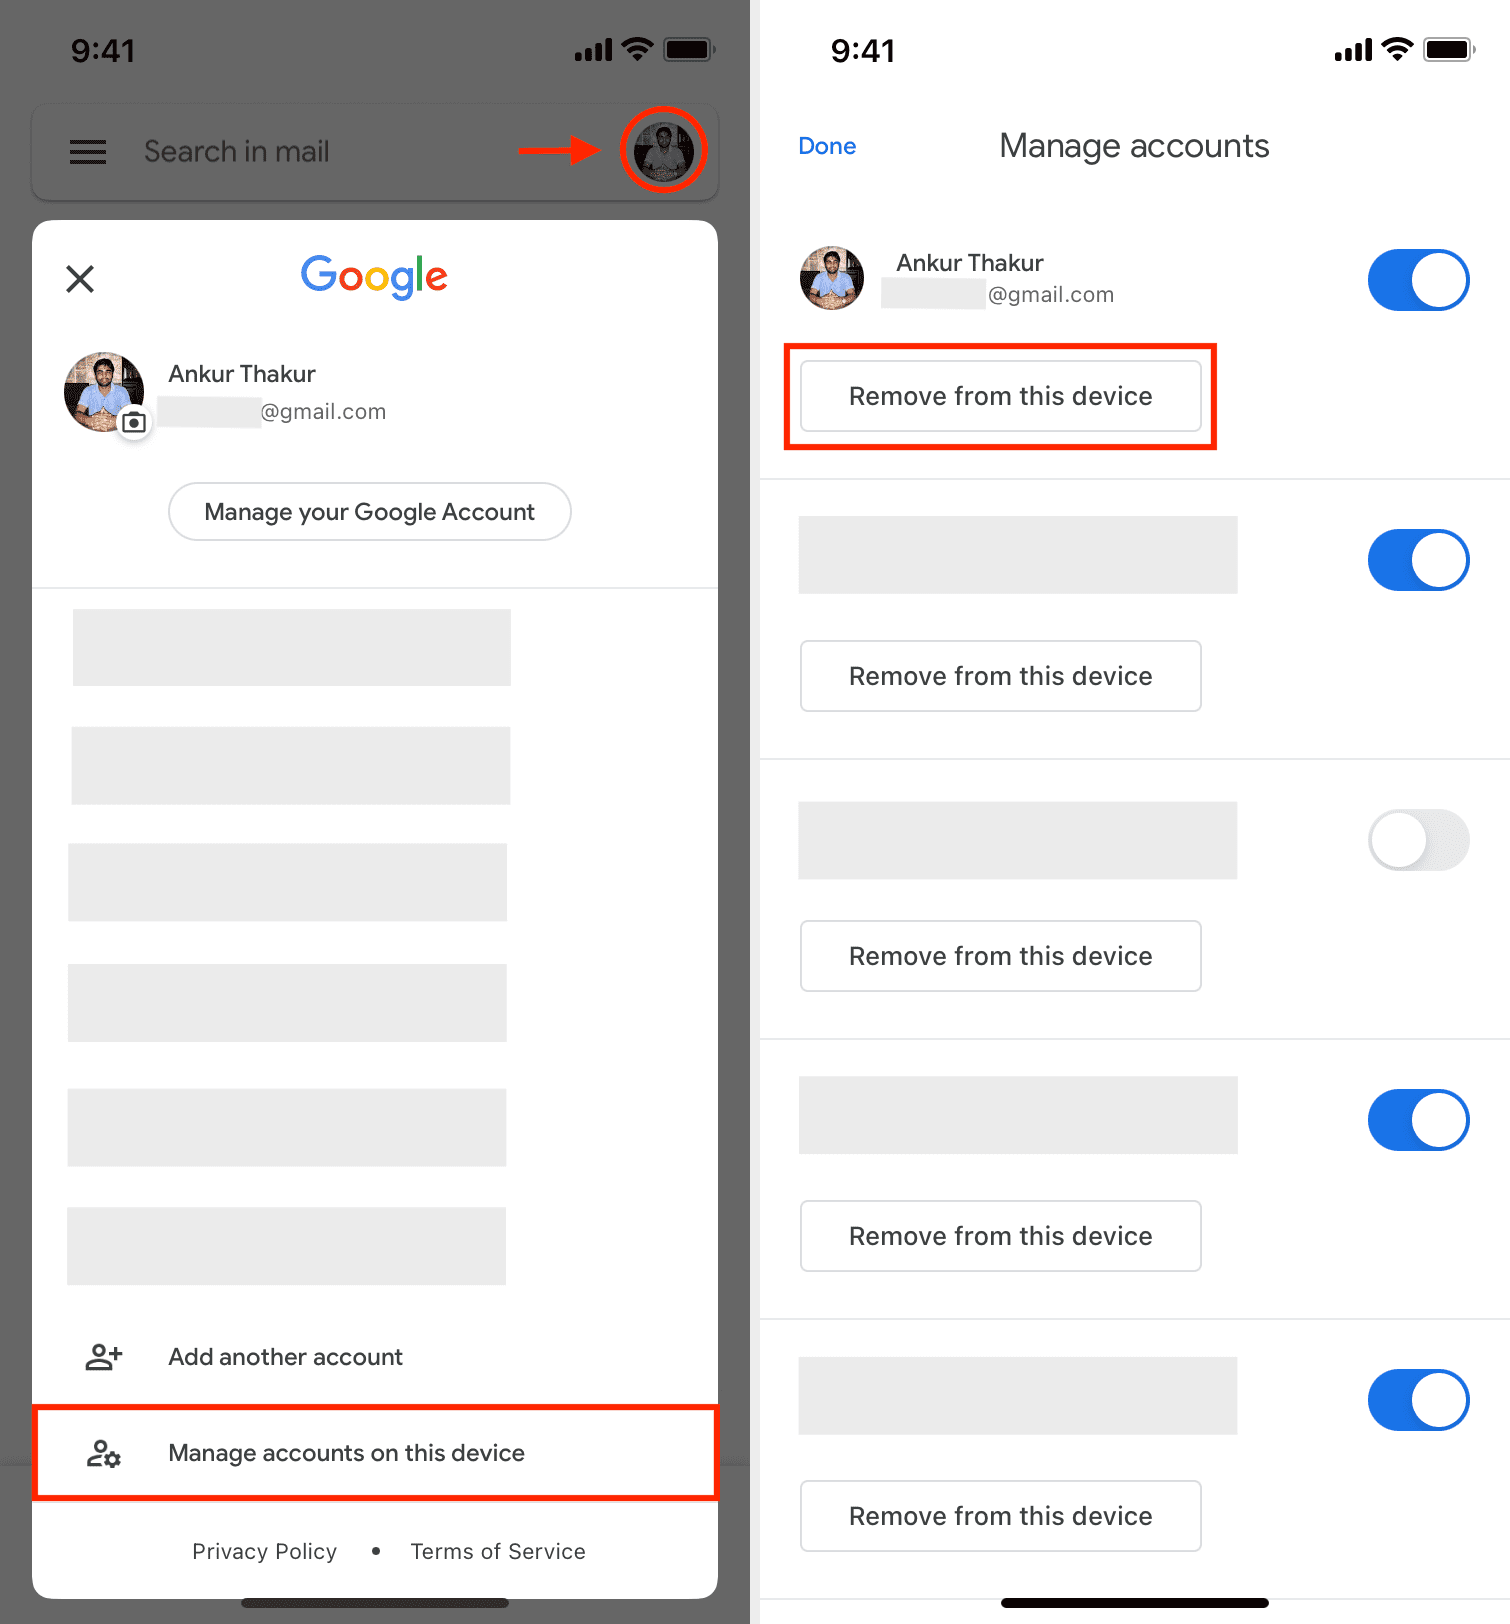 Click on "Delete account" and confirm the removal of the account.
Restart the Mail app and go back to "Manage Accounts."